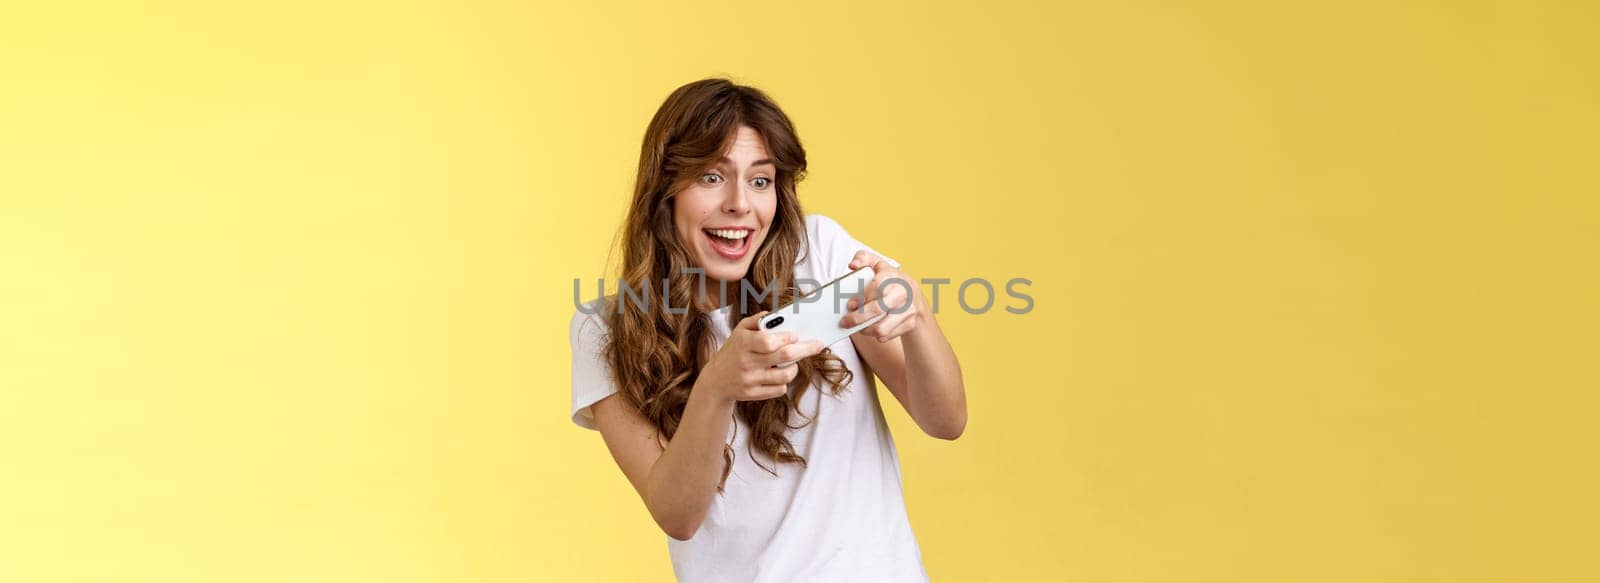 Excited playful enthusiastic girl tilting sideways playing awesome interesting smartphone game car racing smiling determined focuse gaming hold mobile phone horizontal tap display yellow background.